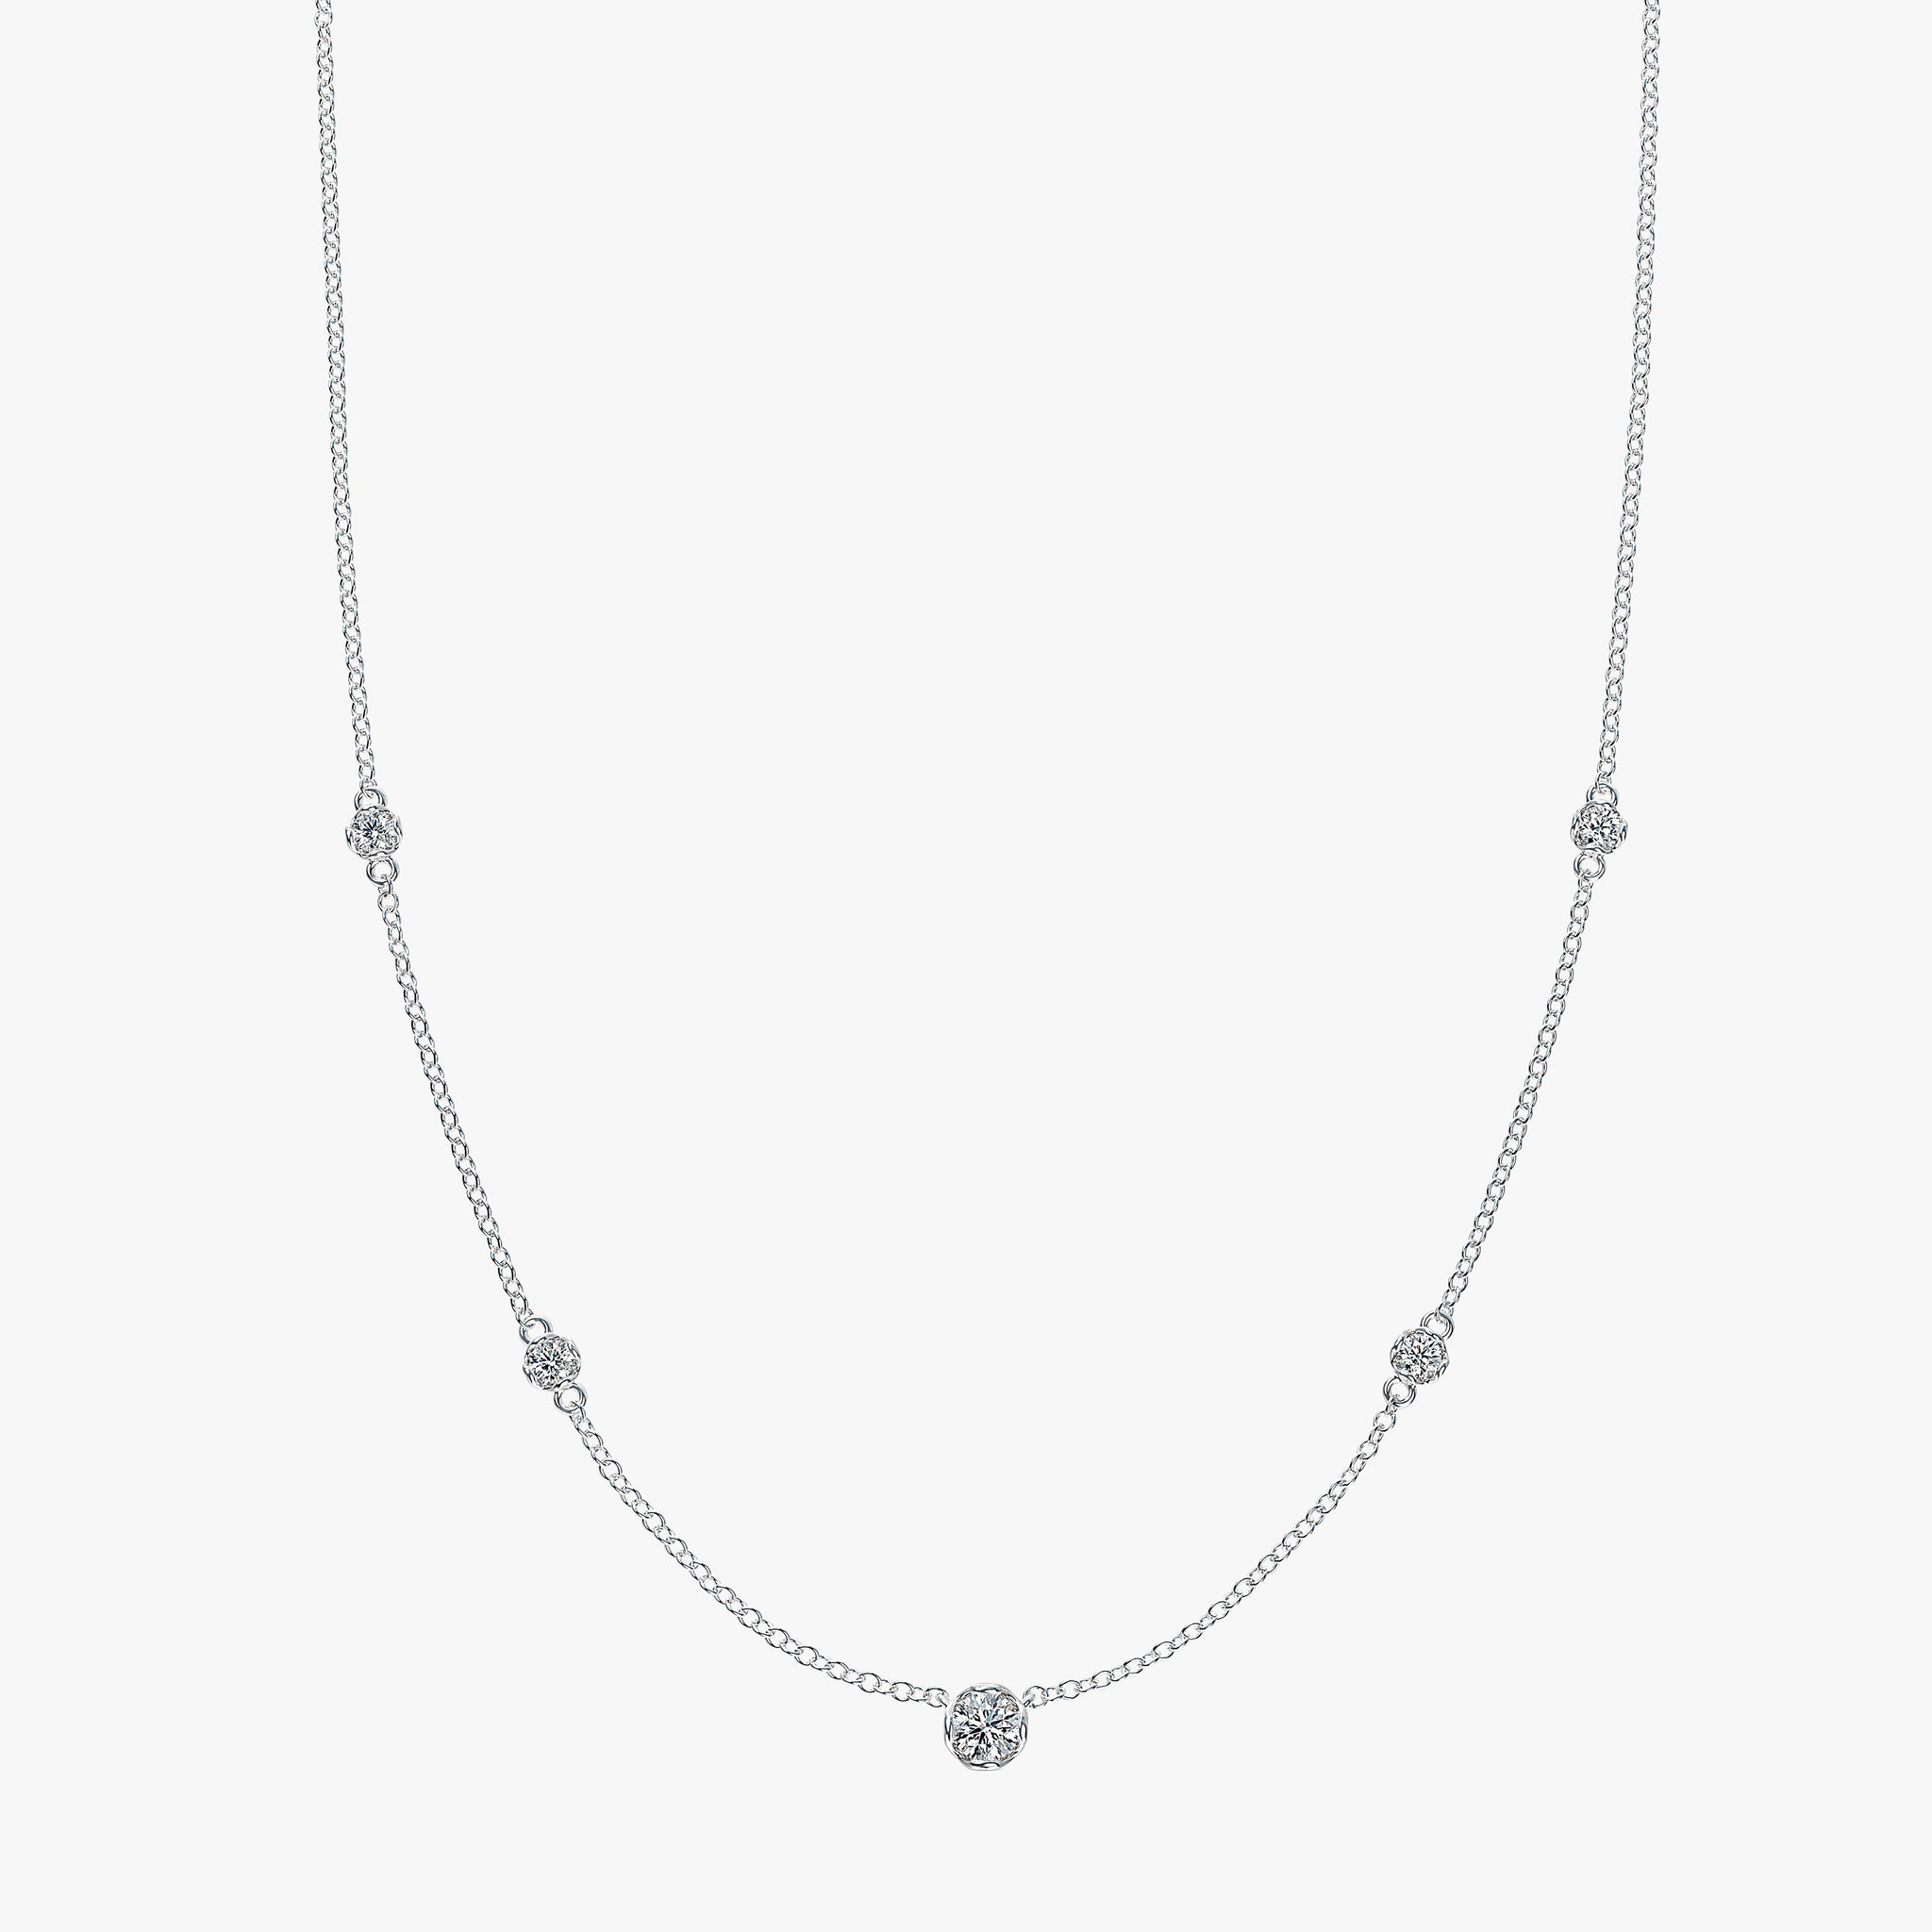 J'EVAR 14KT White Gold By The Yard ALTR Lab Grown Diamond Necklace Front View | 0.35 CT